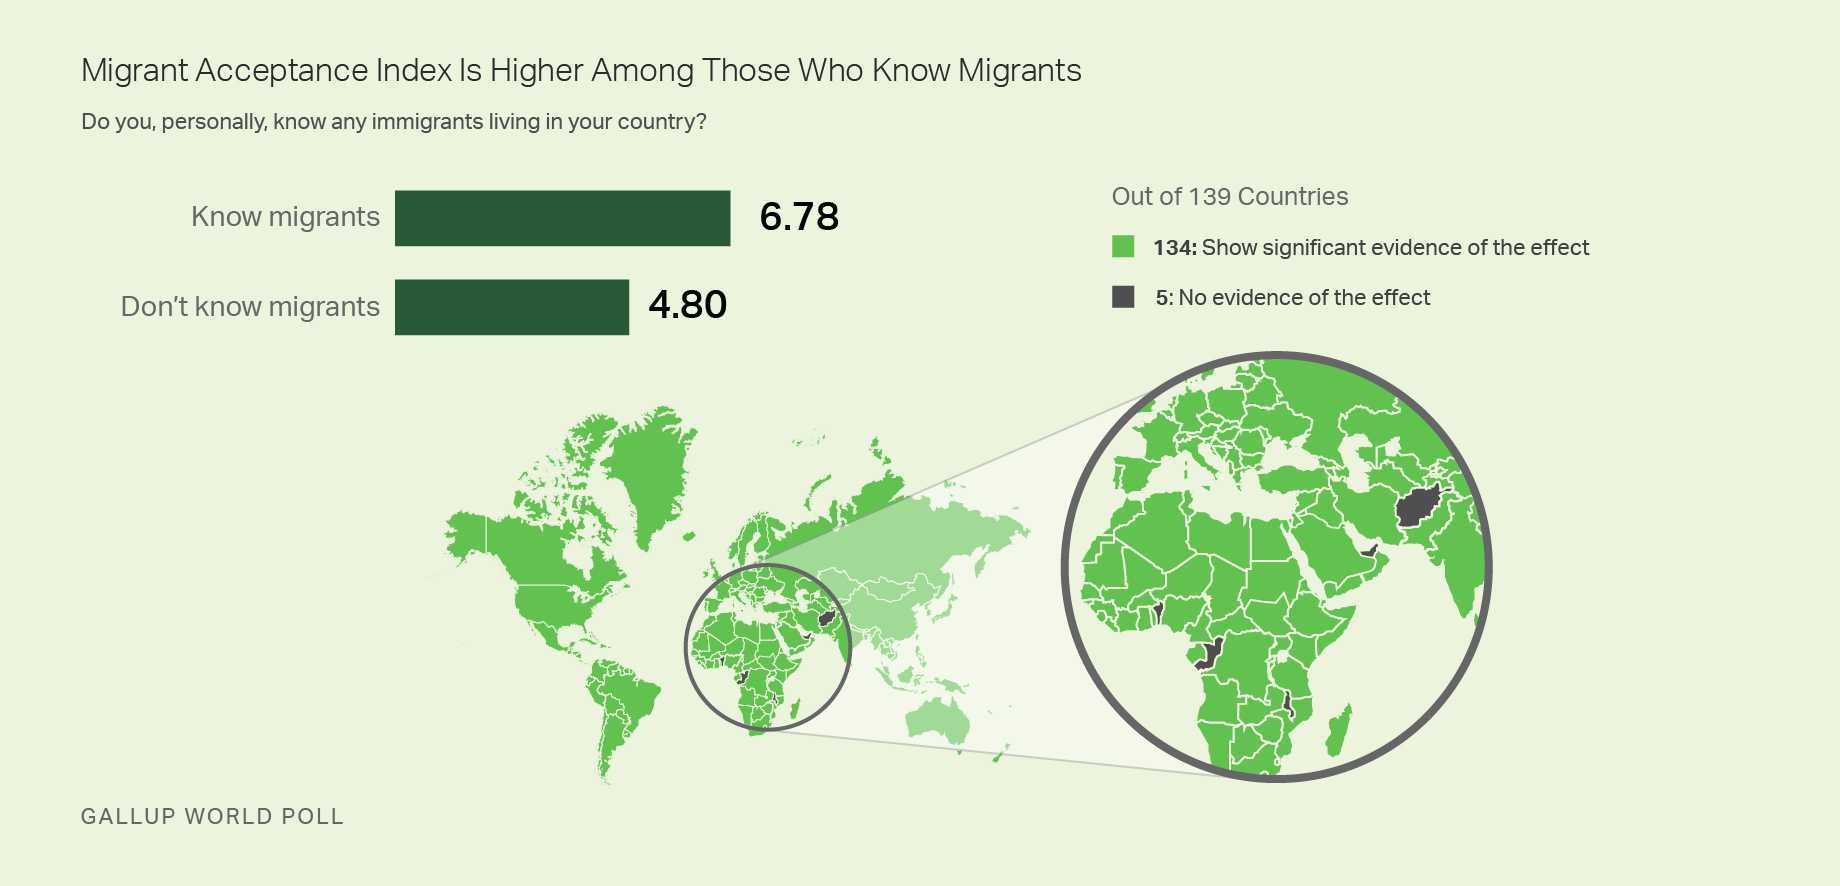 Map and bar graph: Migrant Acceptance Index is higher among those who know migrants (6.78/9.0) than among those who don't (4.80/9.0). 